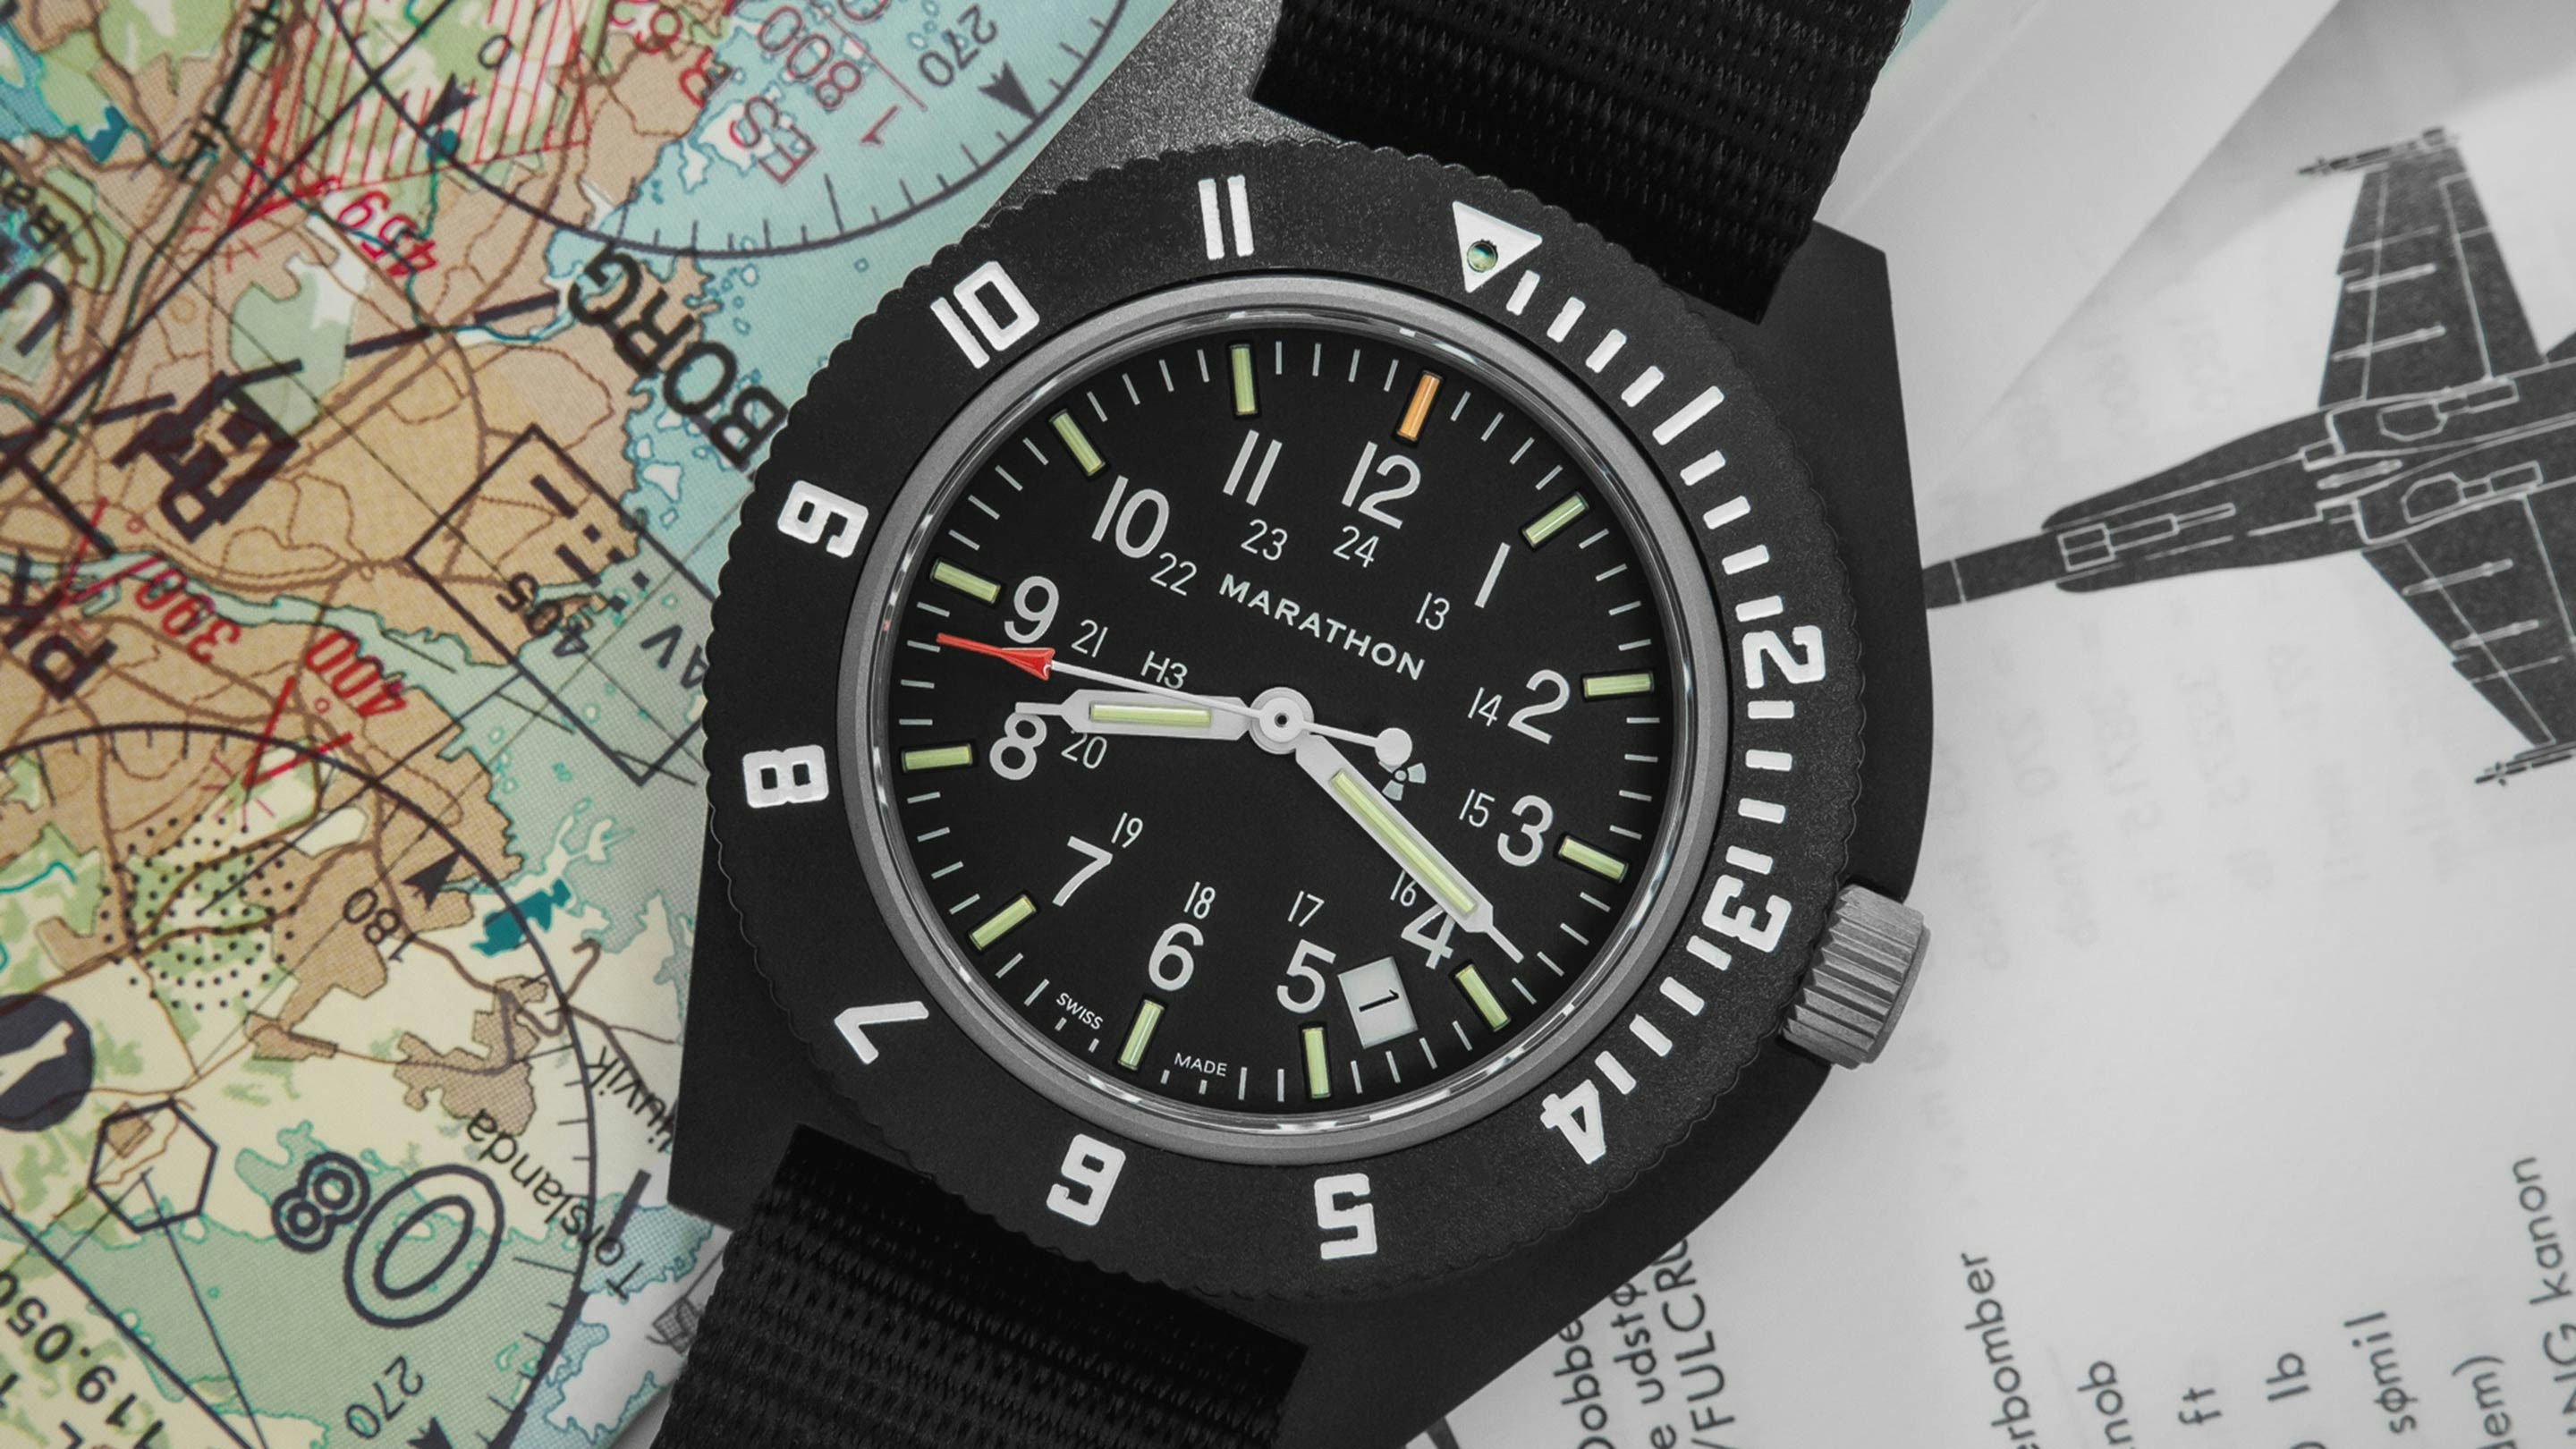 This is the Watch the Military Wears